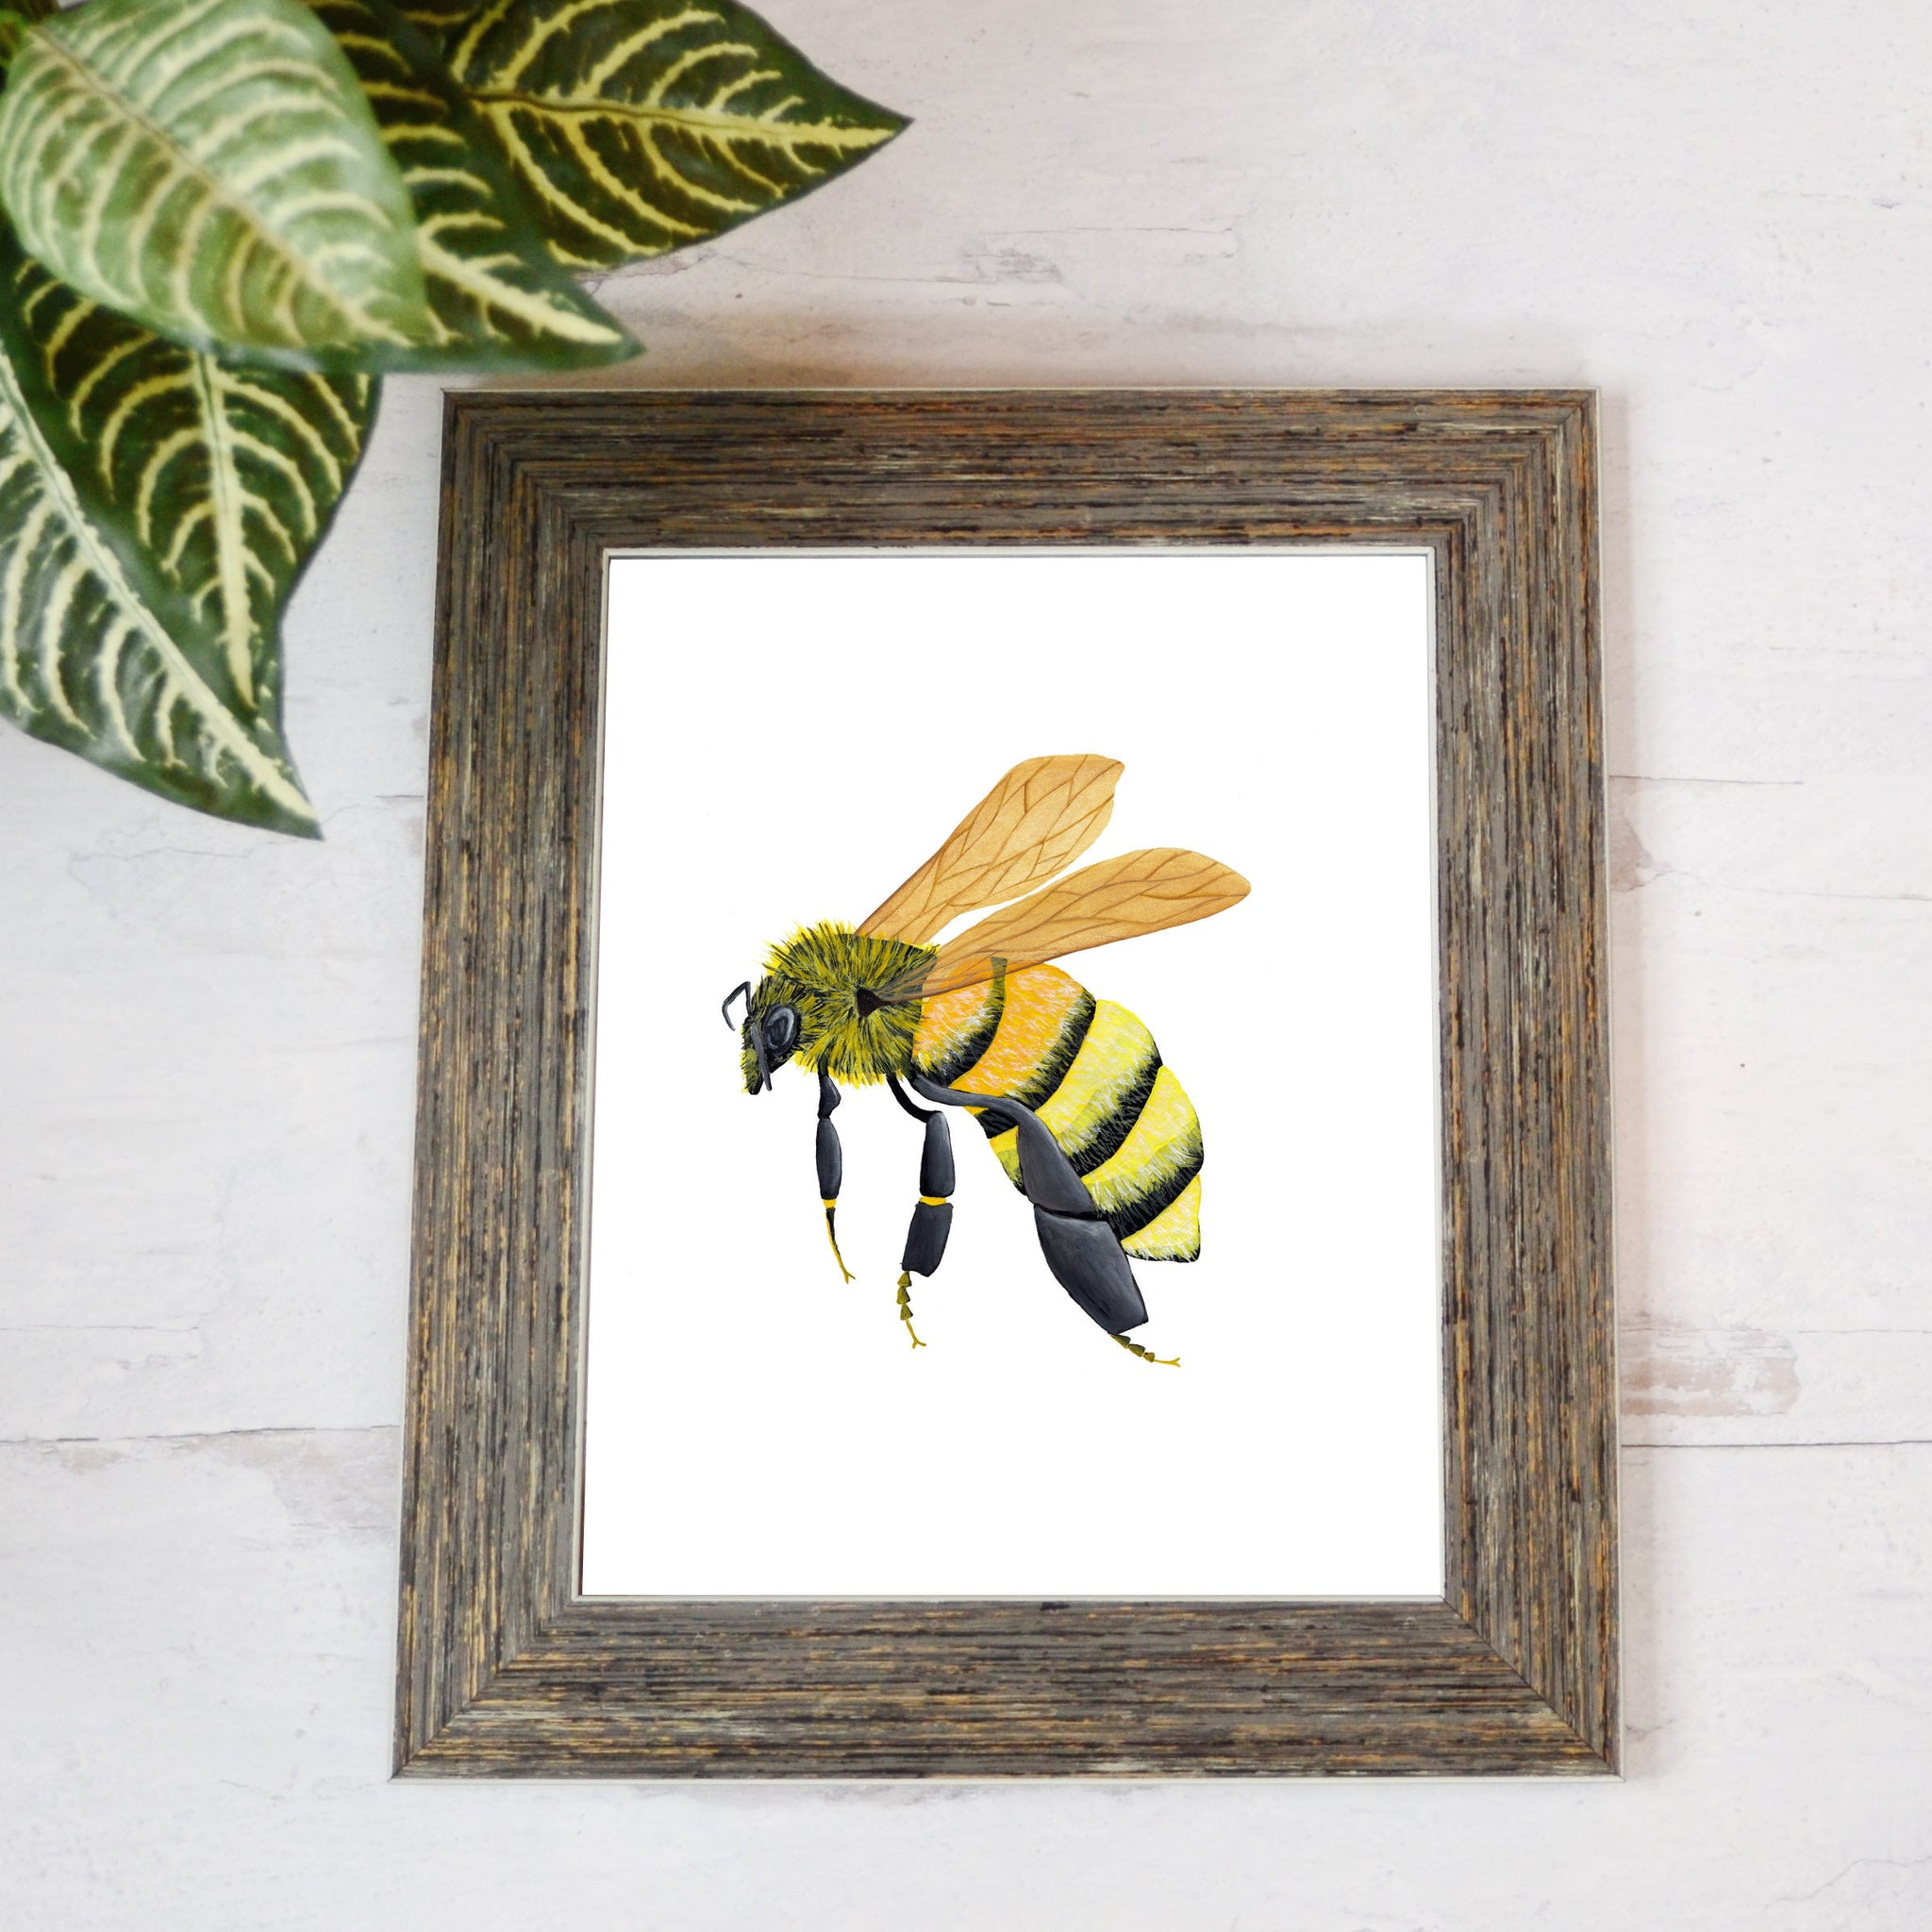 print reproduction of hand painted honey bee profile illustration